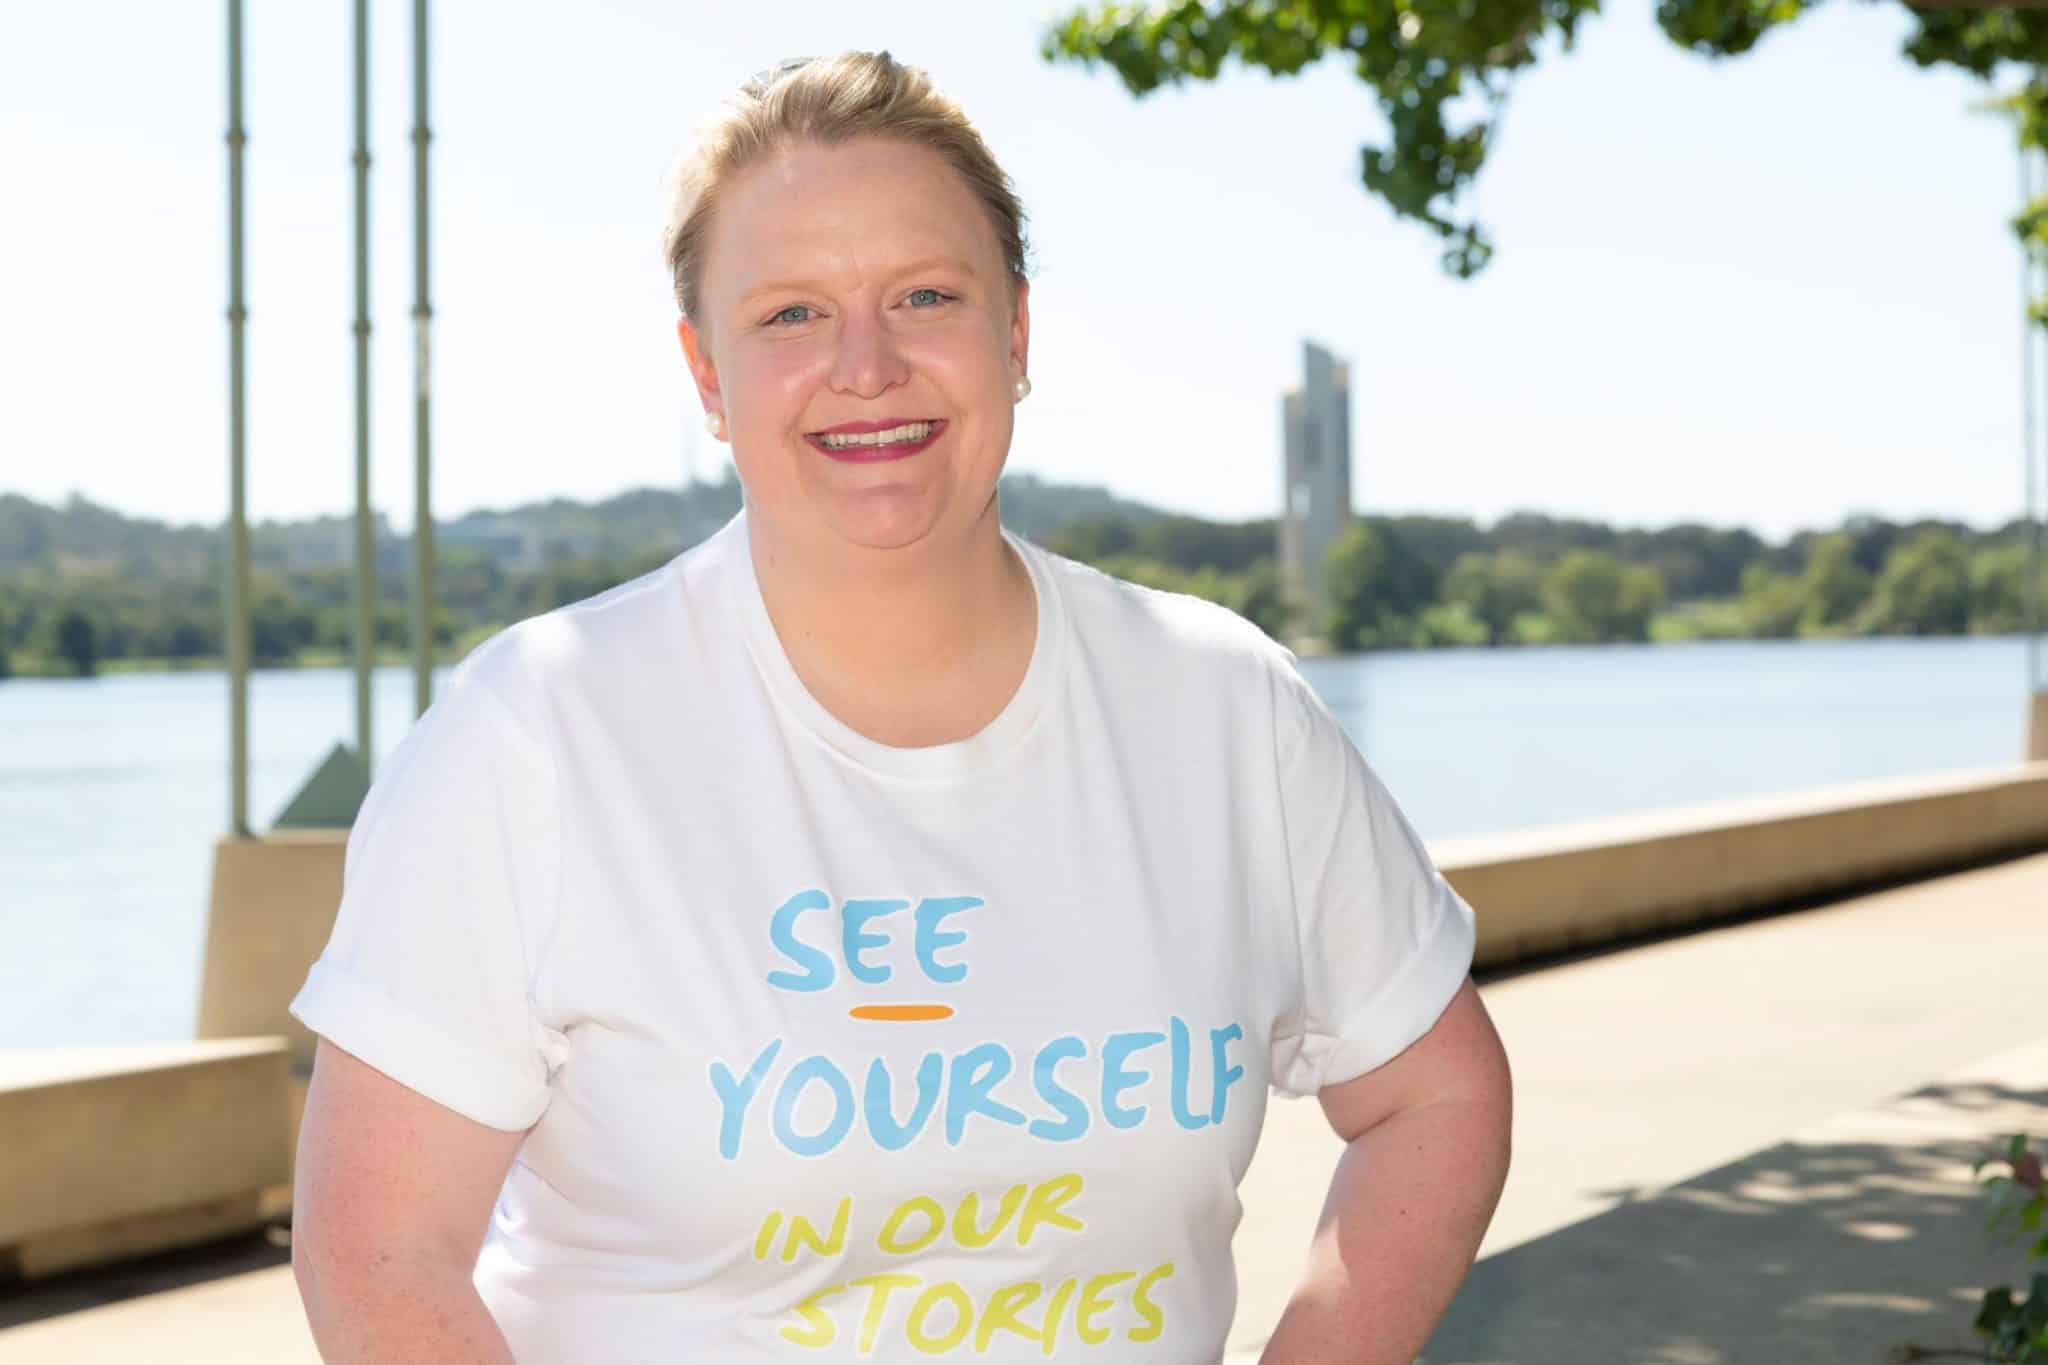 Smiling woman in her 30s Heidi Prowse in a t-shirt standing beside Lake Burley Griffin on a sunny day